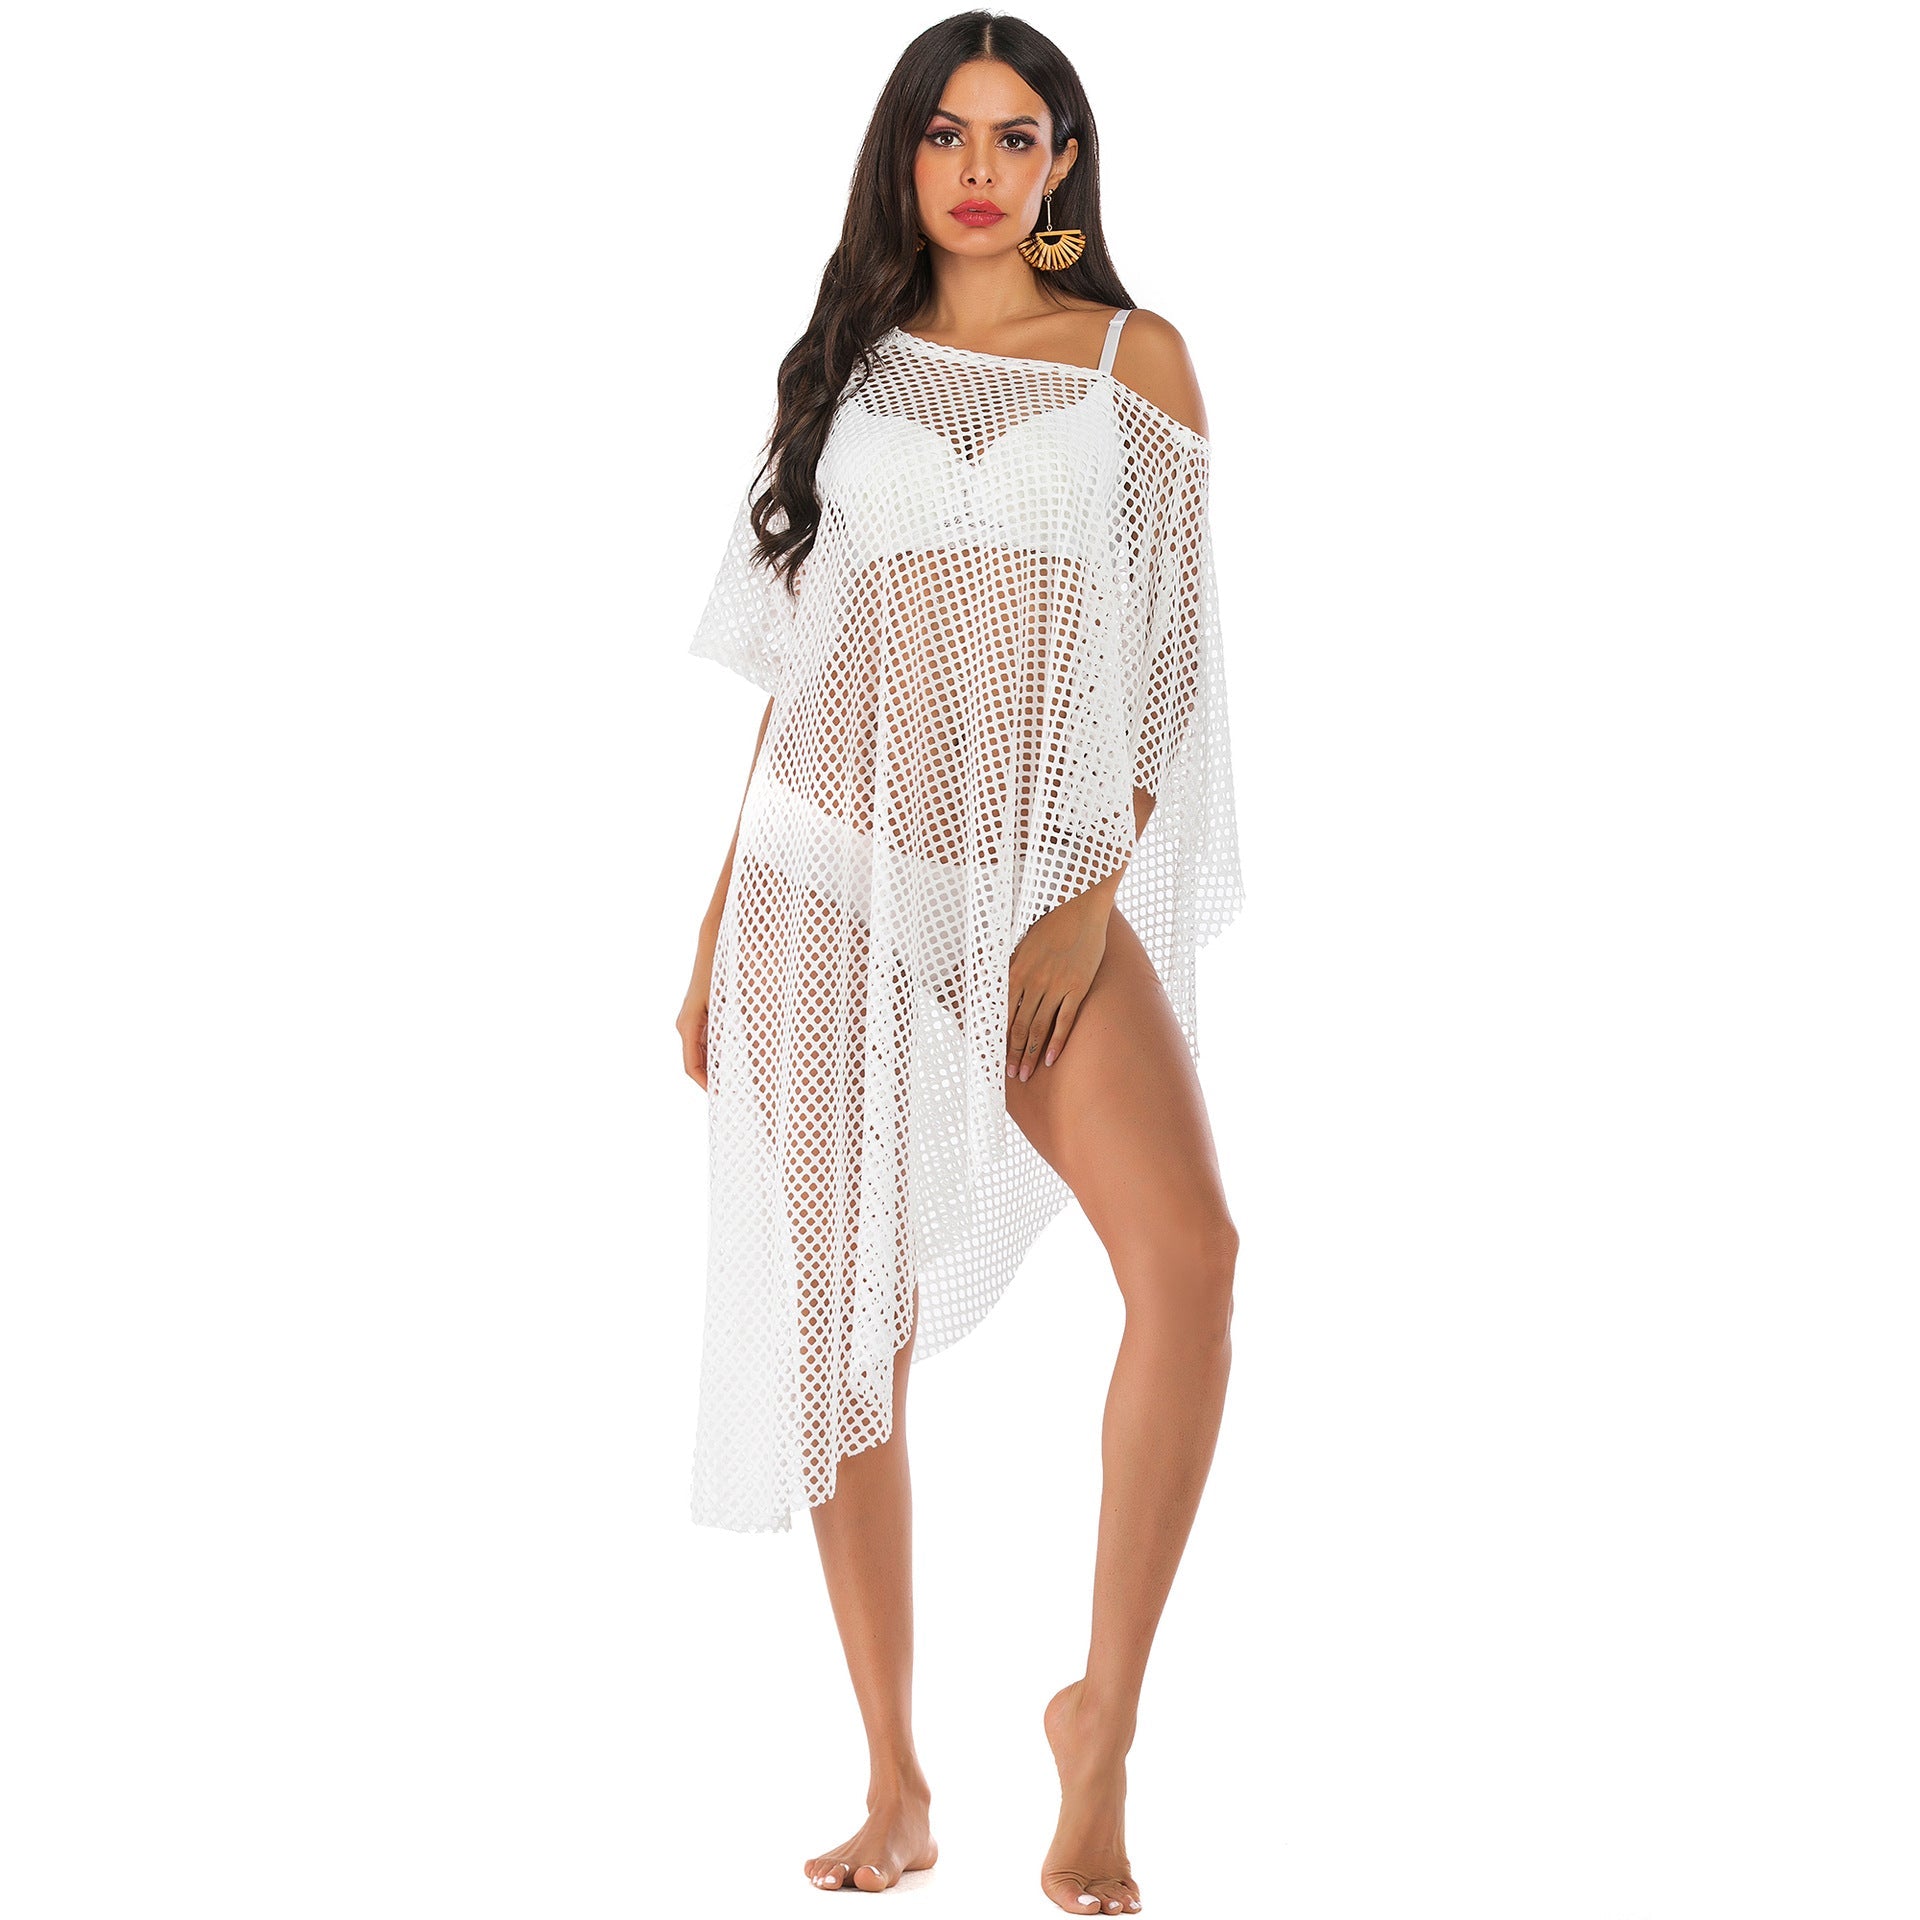 Irregular Off The Shoulder See Through Summer Beach Cover Ups-Swimwear-White-One Size-Free Shipping at meselling99